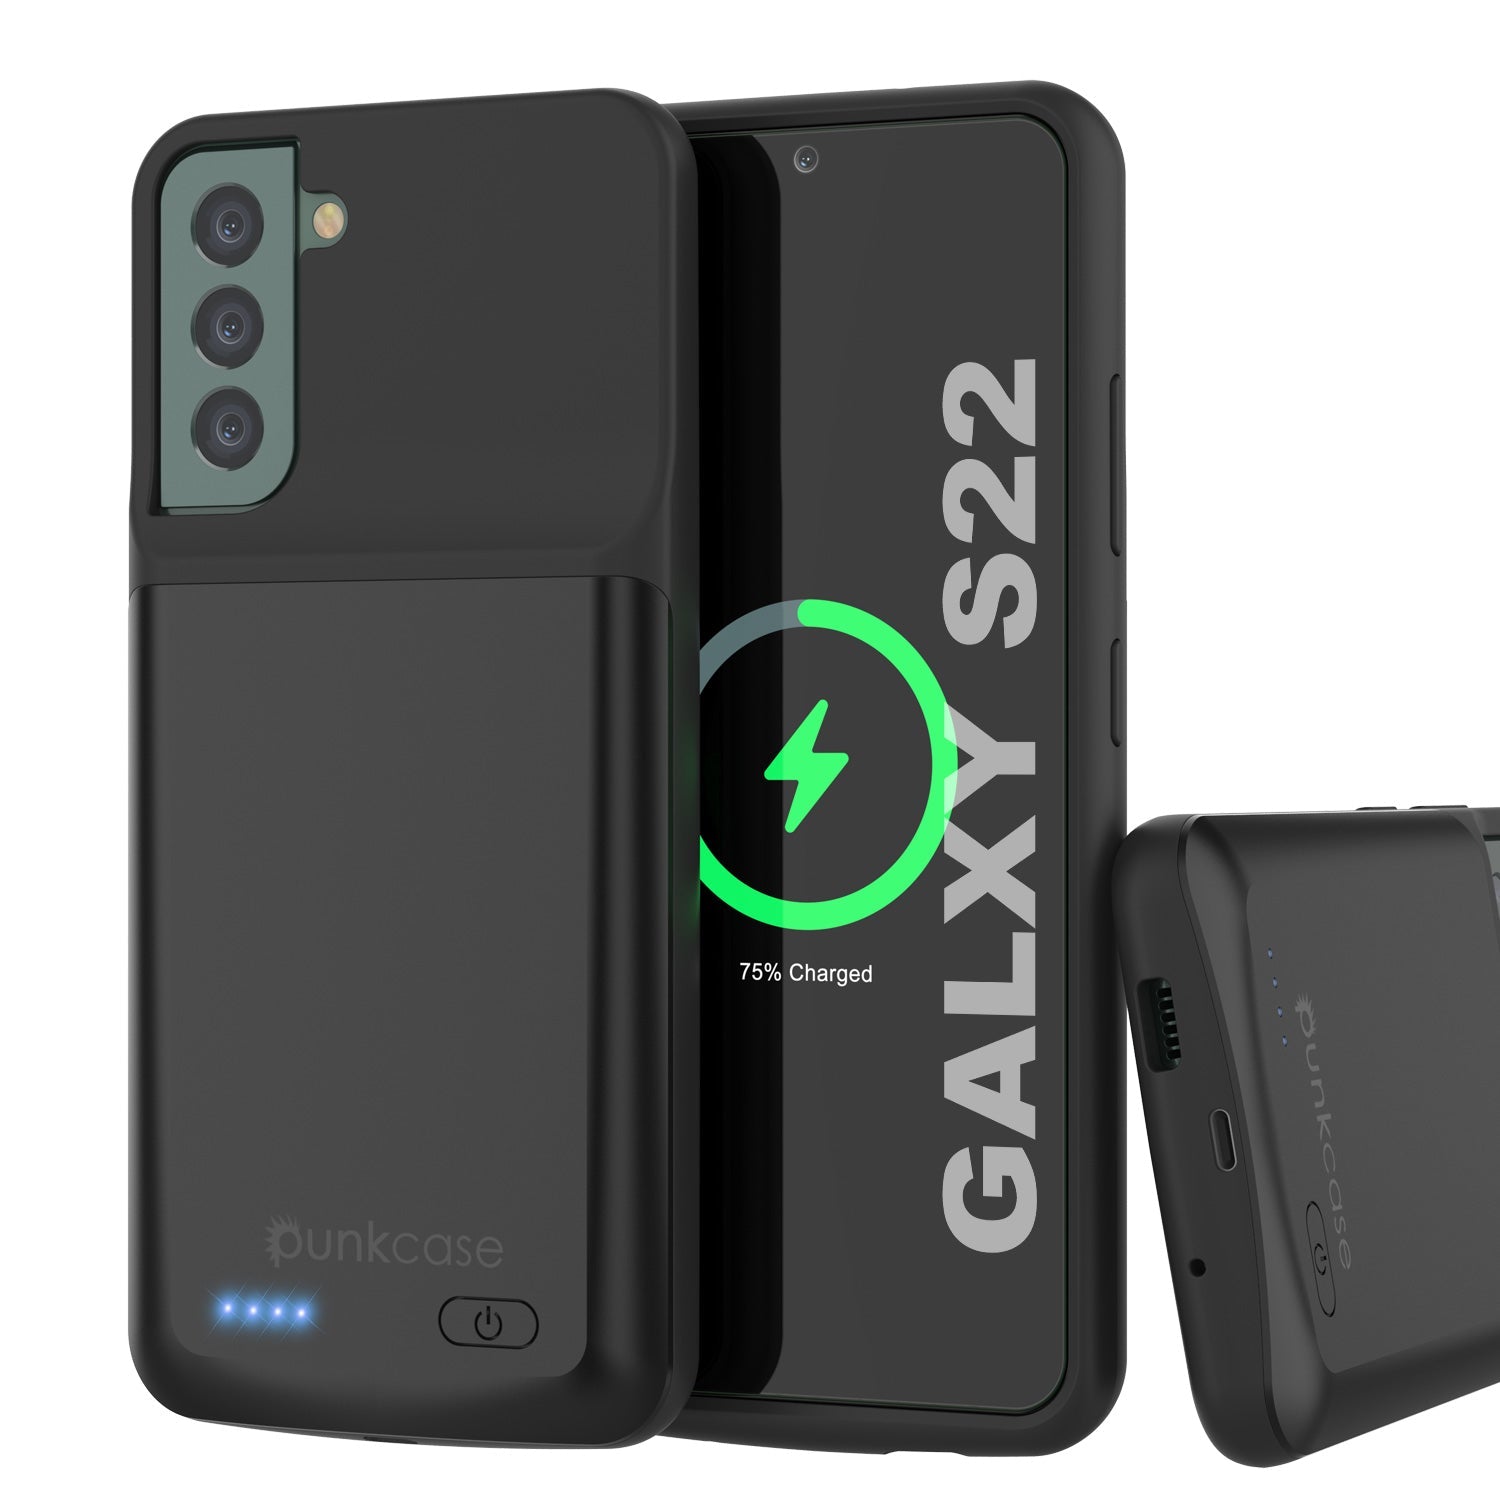 PunkJuice S22 Battery Case Black - Portable Charging Power Juice Bank with 4700mAh